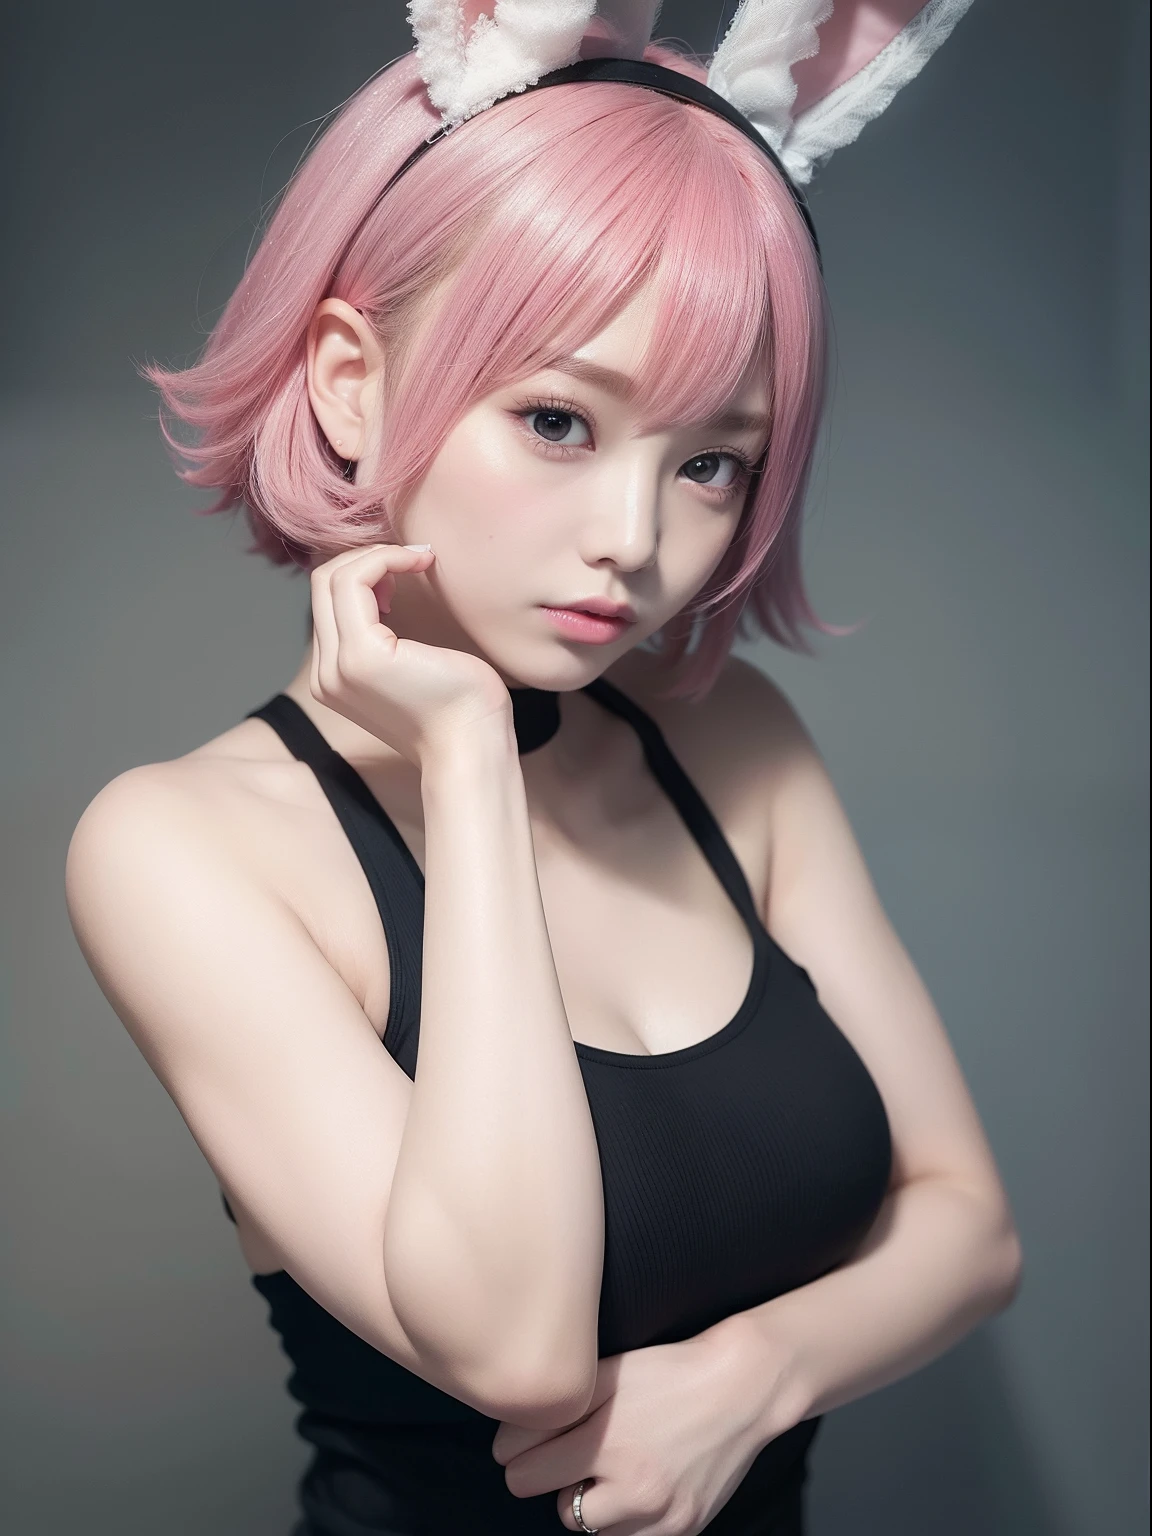 Large black tank top、Damaged jeans、Pink Shortcut Bob、Realistic rabbit ears、rabbit ears pink hair sticking out of the head,、Bewitching atmosphere、Beautiful shaped hands、K-POP、Pink rabbit ears、1 girl in、solo、​masterpiece、top-quality、realisitic、Hyper-detailing、(Glossy skin:1.4)、absurderes、short pink hair、Slender beauties、Dynamic Lighting、hight resolution、sharp focus、depth of fields、(thick thight:1.0)、A slender :1.2、((Short-cut bob hair))、((k pop:1.3))、Highly detailed facial and skin texture、((Enchanting))、Anatomically correct number of fingers、Correct anatomy、